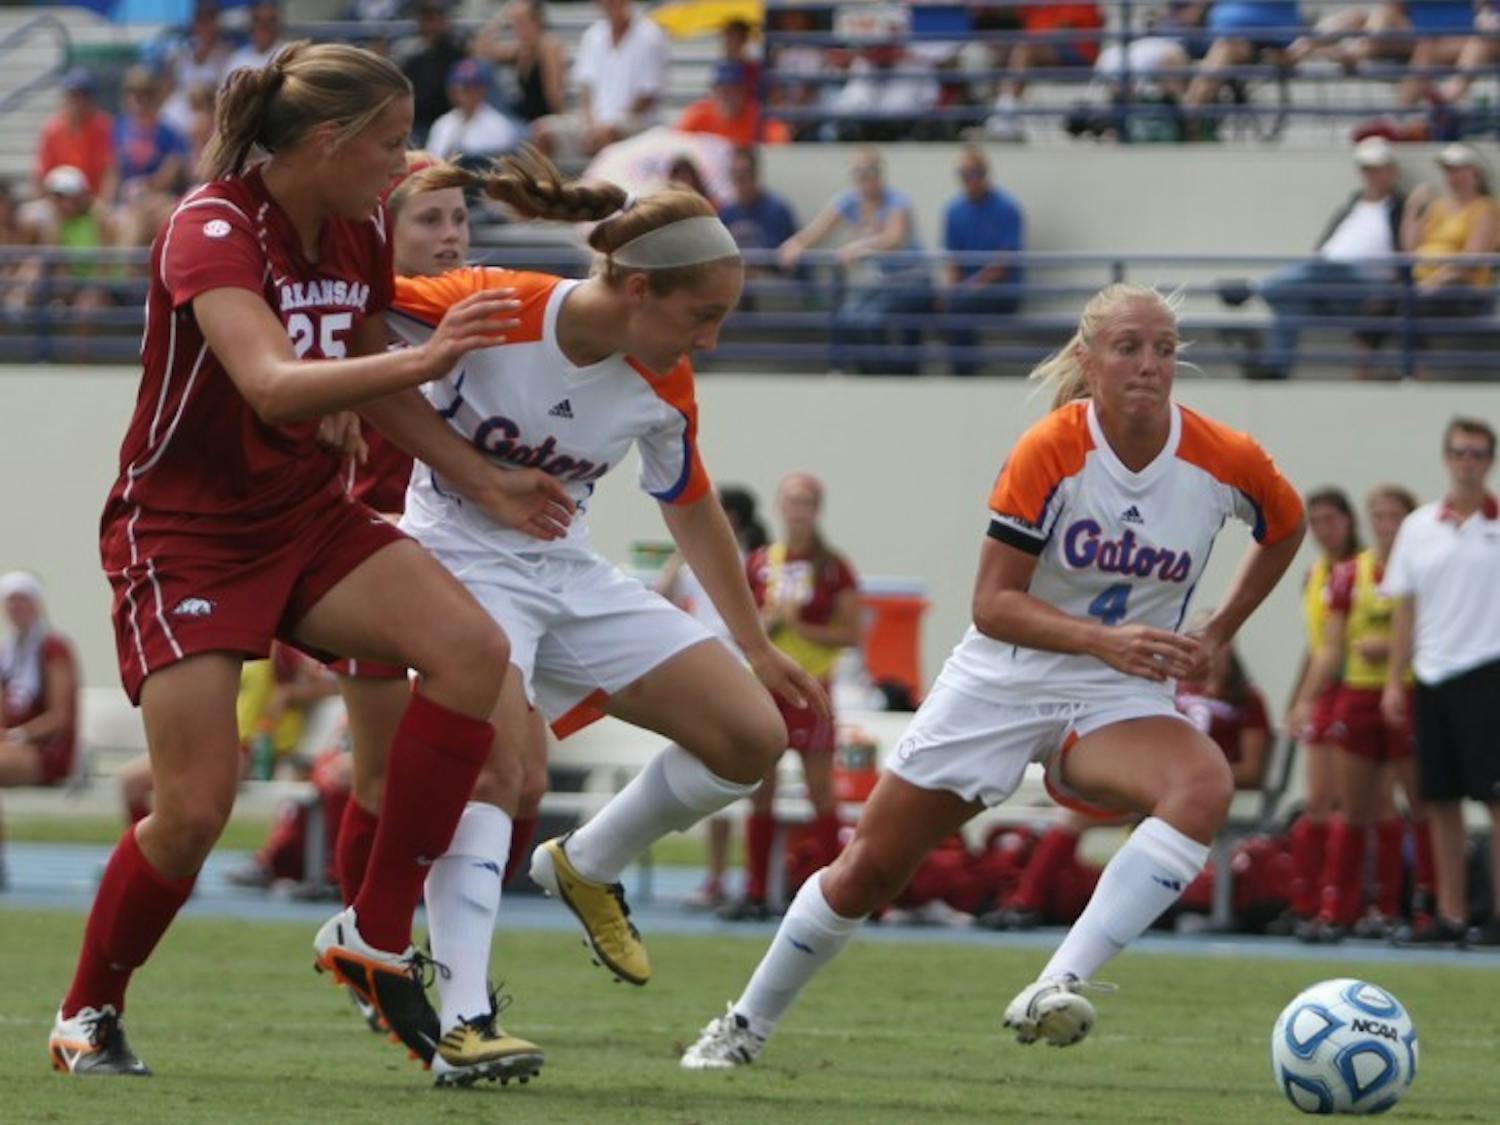 Forward McKenzie Barney (4) pushes the ball past Arkansas forward Lindsey Mayo (25) in UF's 4-0 win on Sunday at James G. Pressly Stadium. Barney scored a goal in her return from injury.